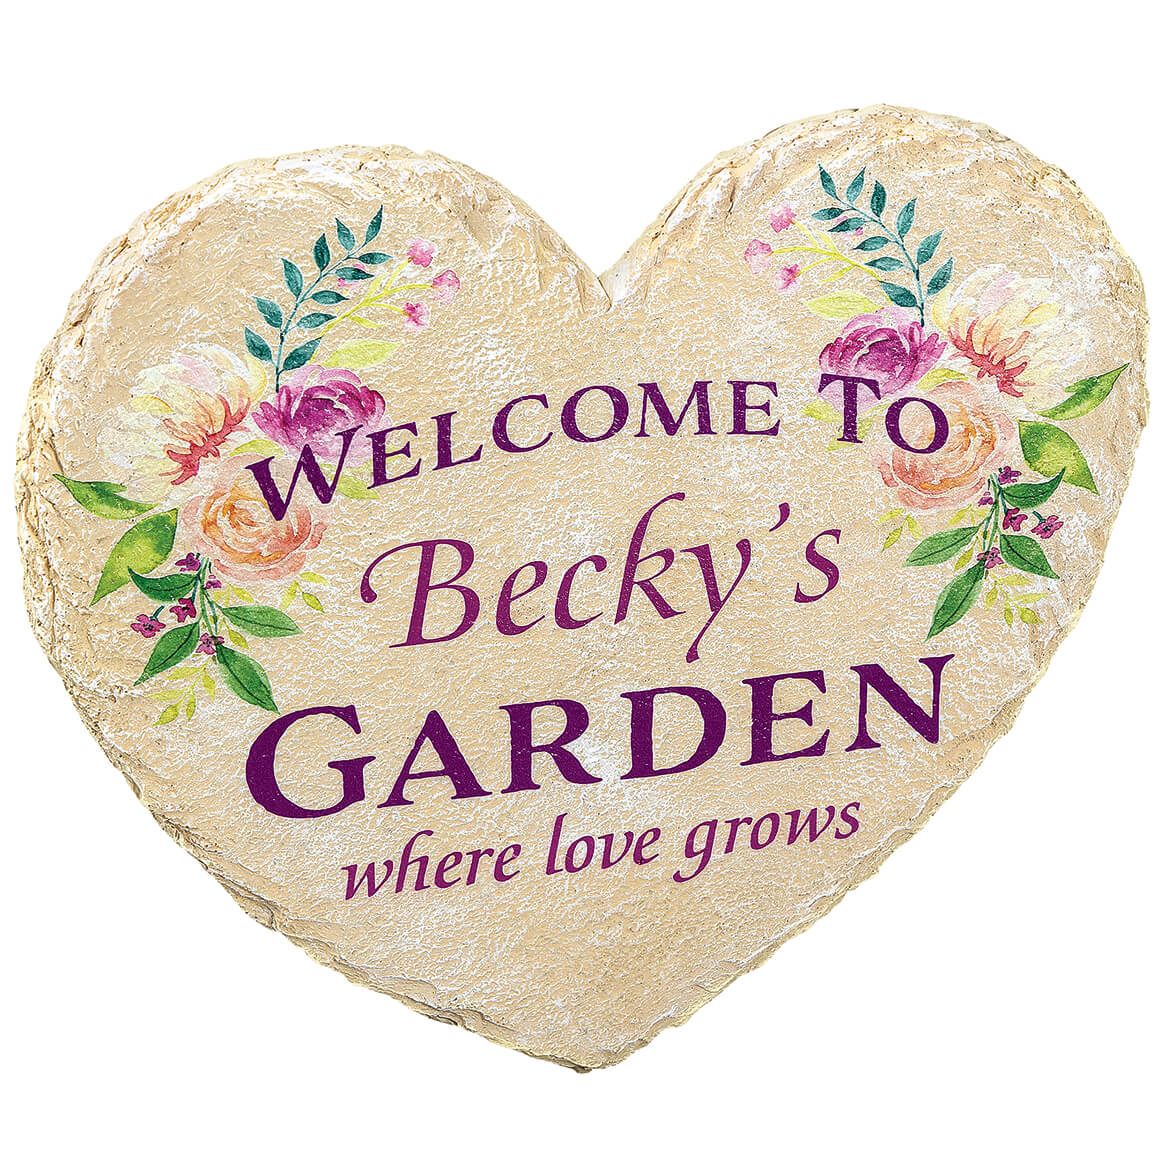 Personalized Heart-Shaped "Where Love Grows" Garden Stone + '-' + 374121